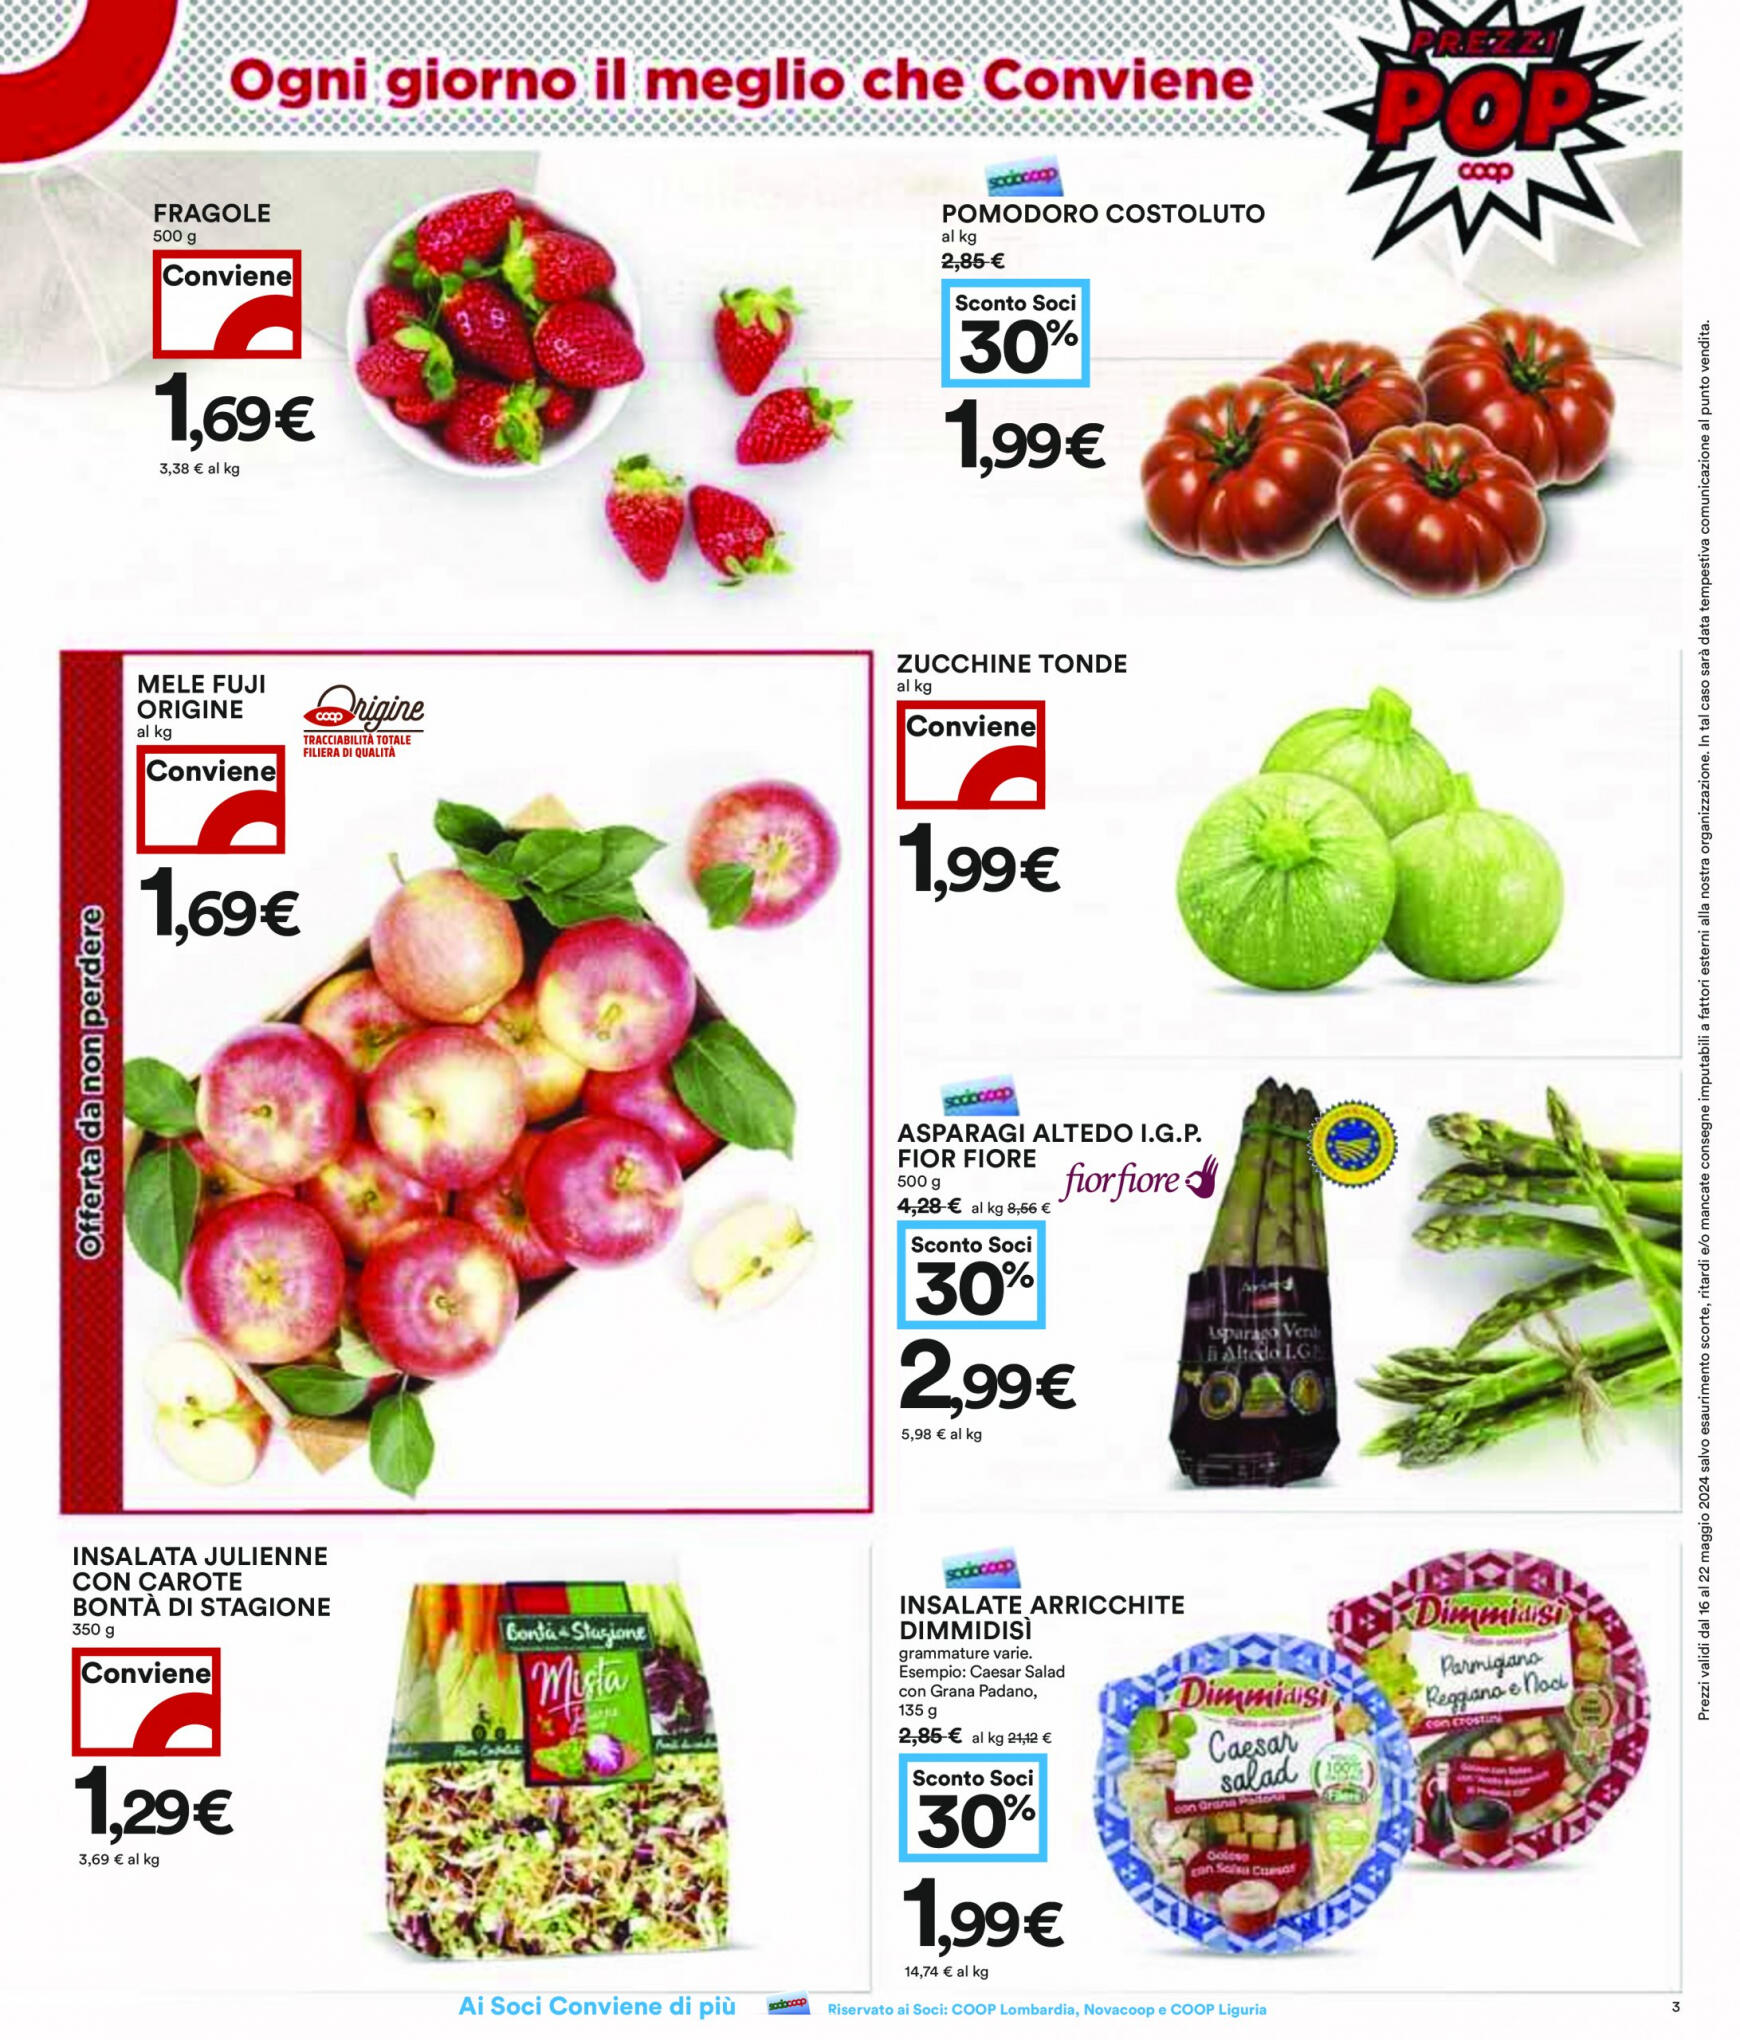 coop - Nuovo volantino Coop 16.05. - 22.05. - page: 3